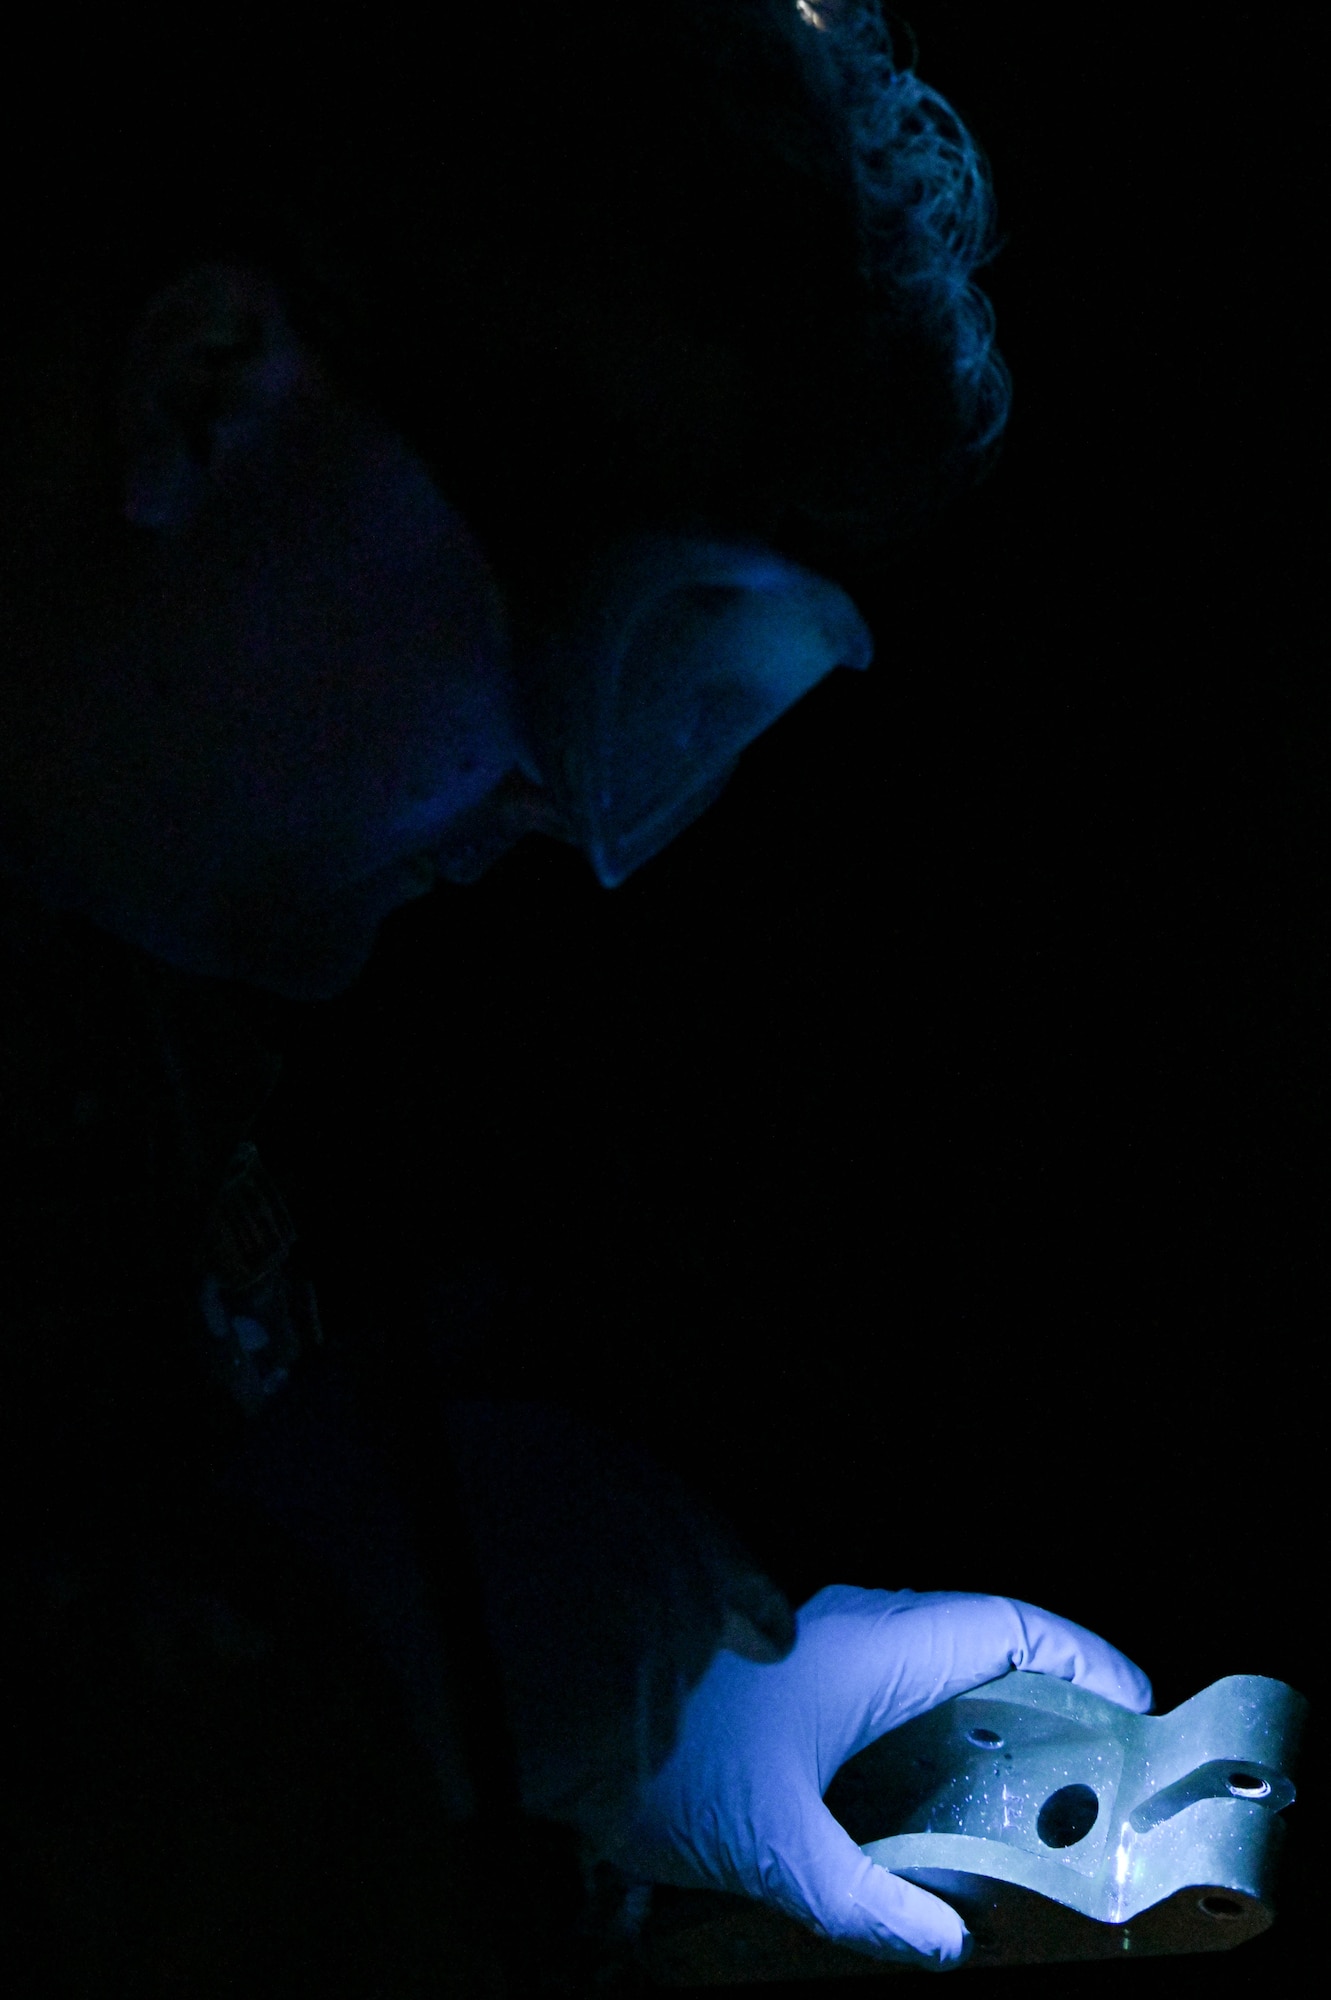 U.S. Air Force Tech. Sgt. Cody Dickerson, 23rd Maintenance Squadron nondestructive inspection supervisor, looks at a cracked piece of metal under ultraviolet-light during an inspection at Moody Air Force Base, Georgia, Dec. 5, 2022. This technique detects cracks inside aircraft parts to prevent risks to flight safety. (U.S. Air Force photo by Senior Airman Rebeckah Medeiros)